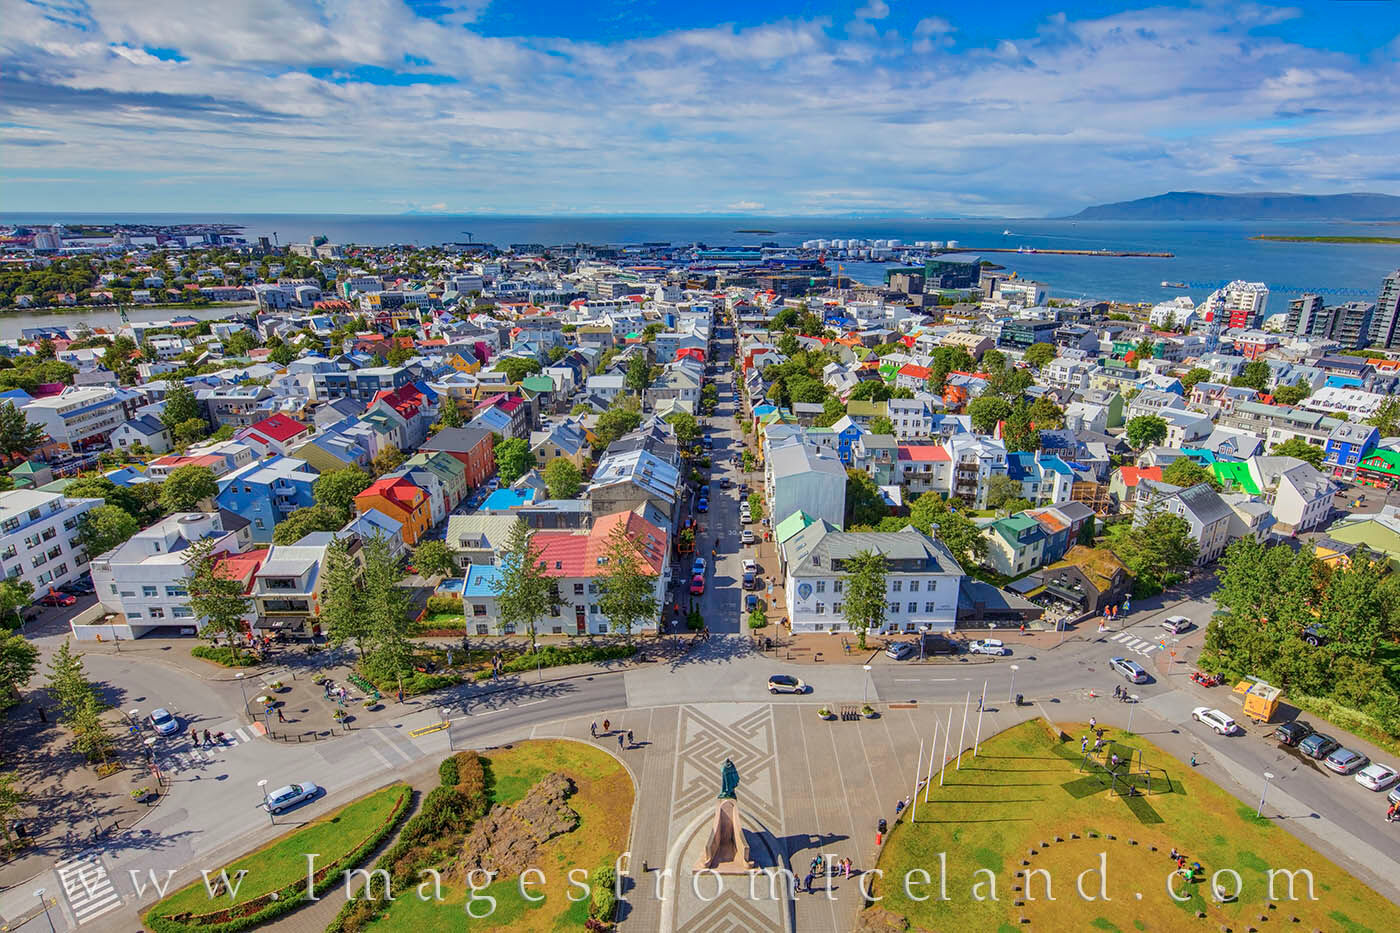 From the bell tower in Hallgrímskirkja, the colorful rooftops of Reykjavik, Iceland’s capital, spread out across this coast...